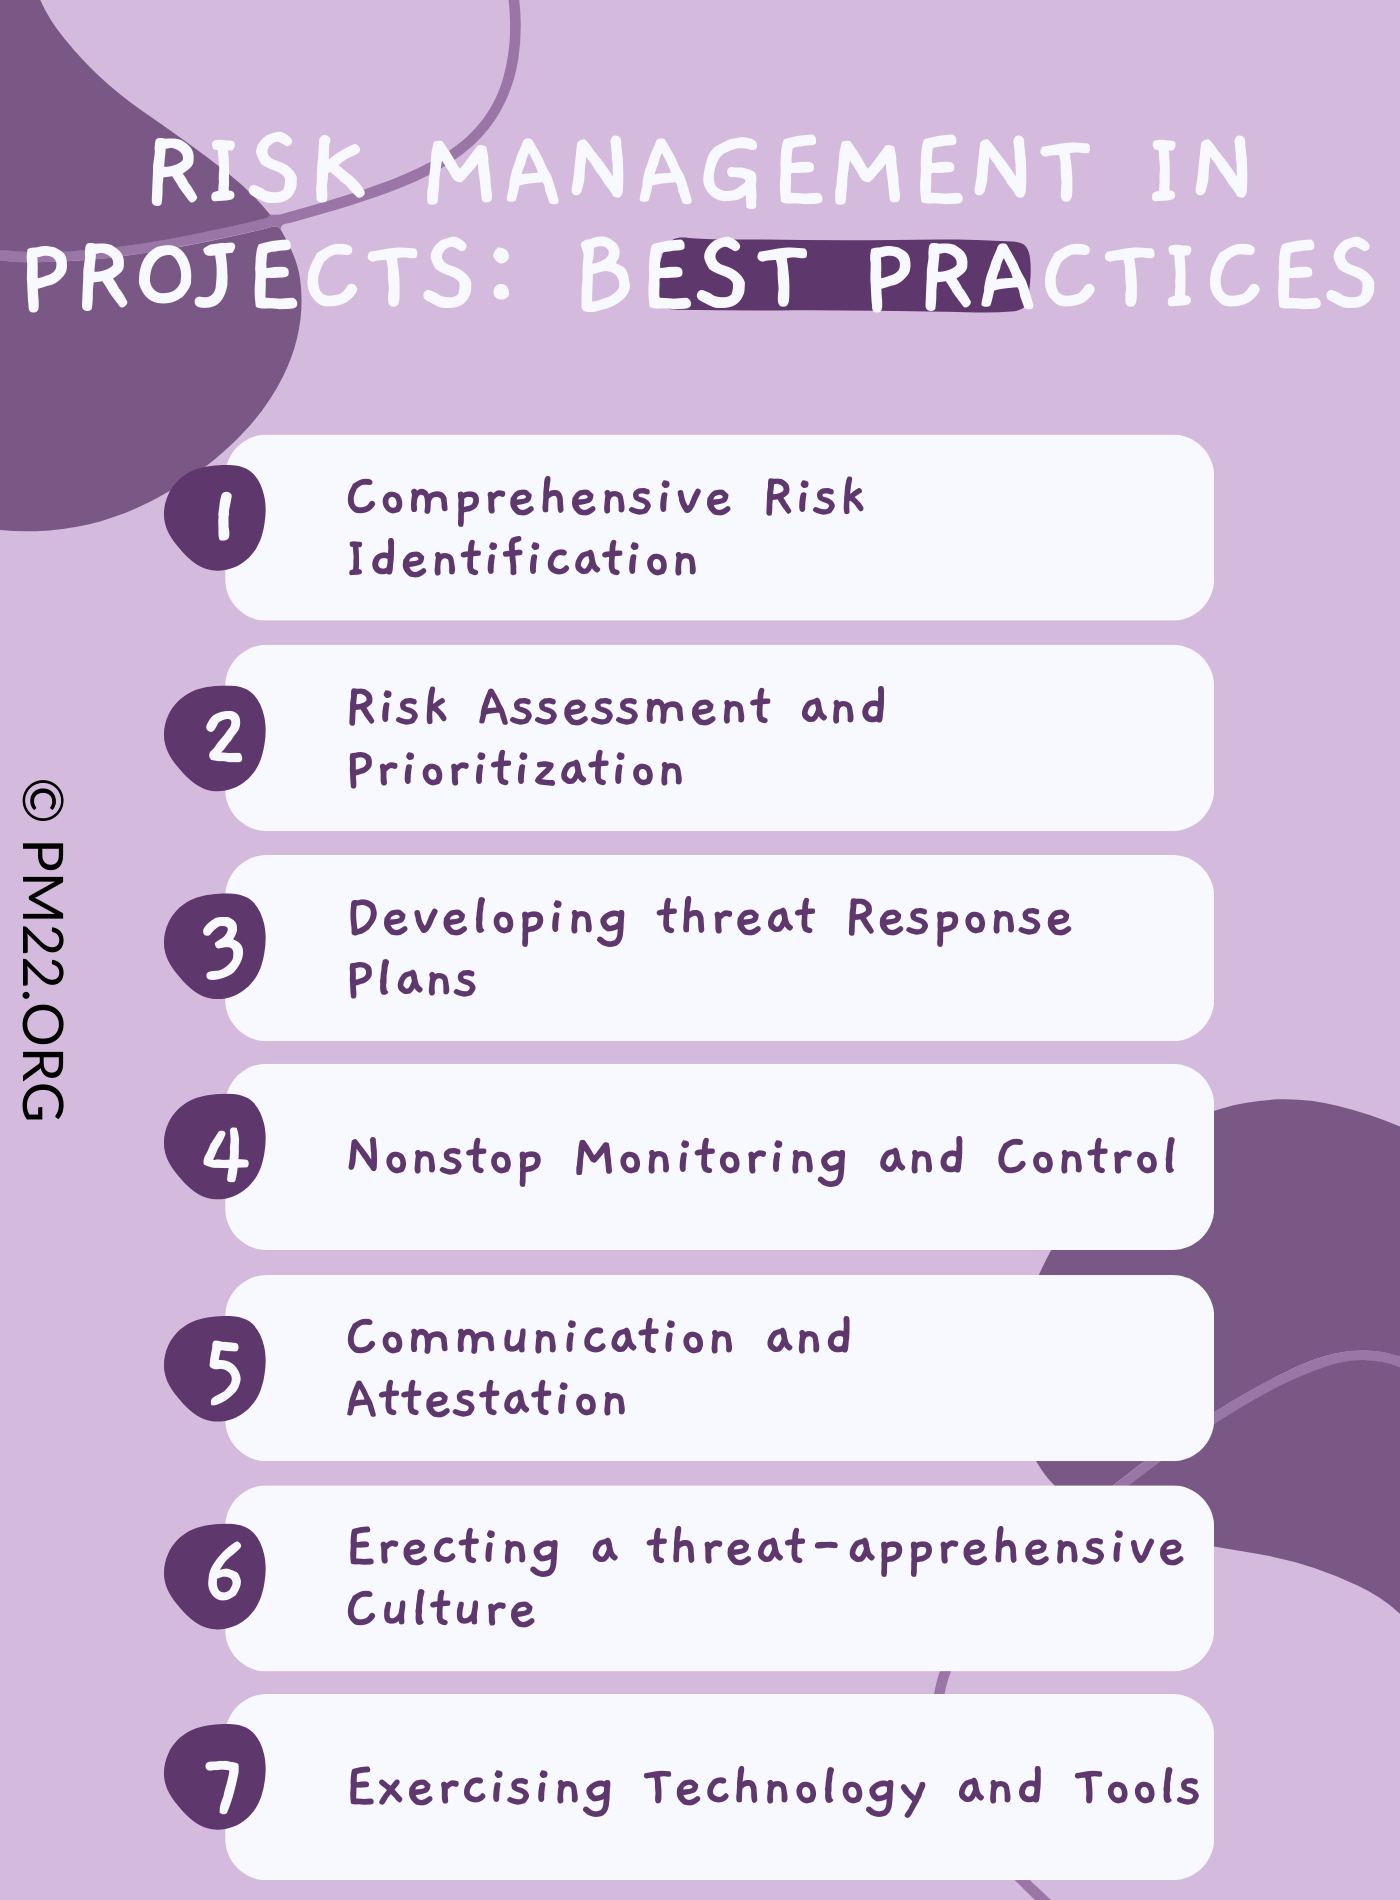 Risk Management in Projects: Best Practices